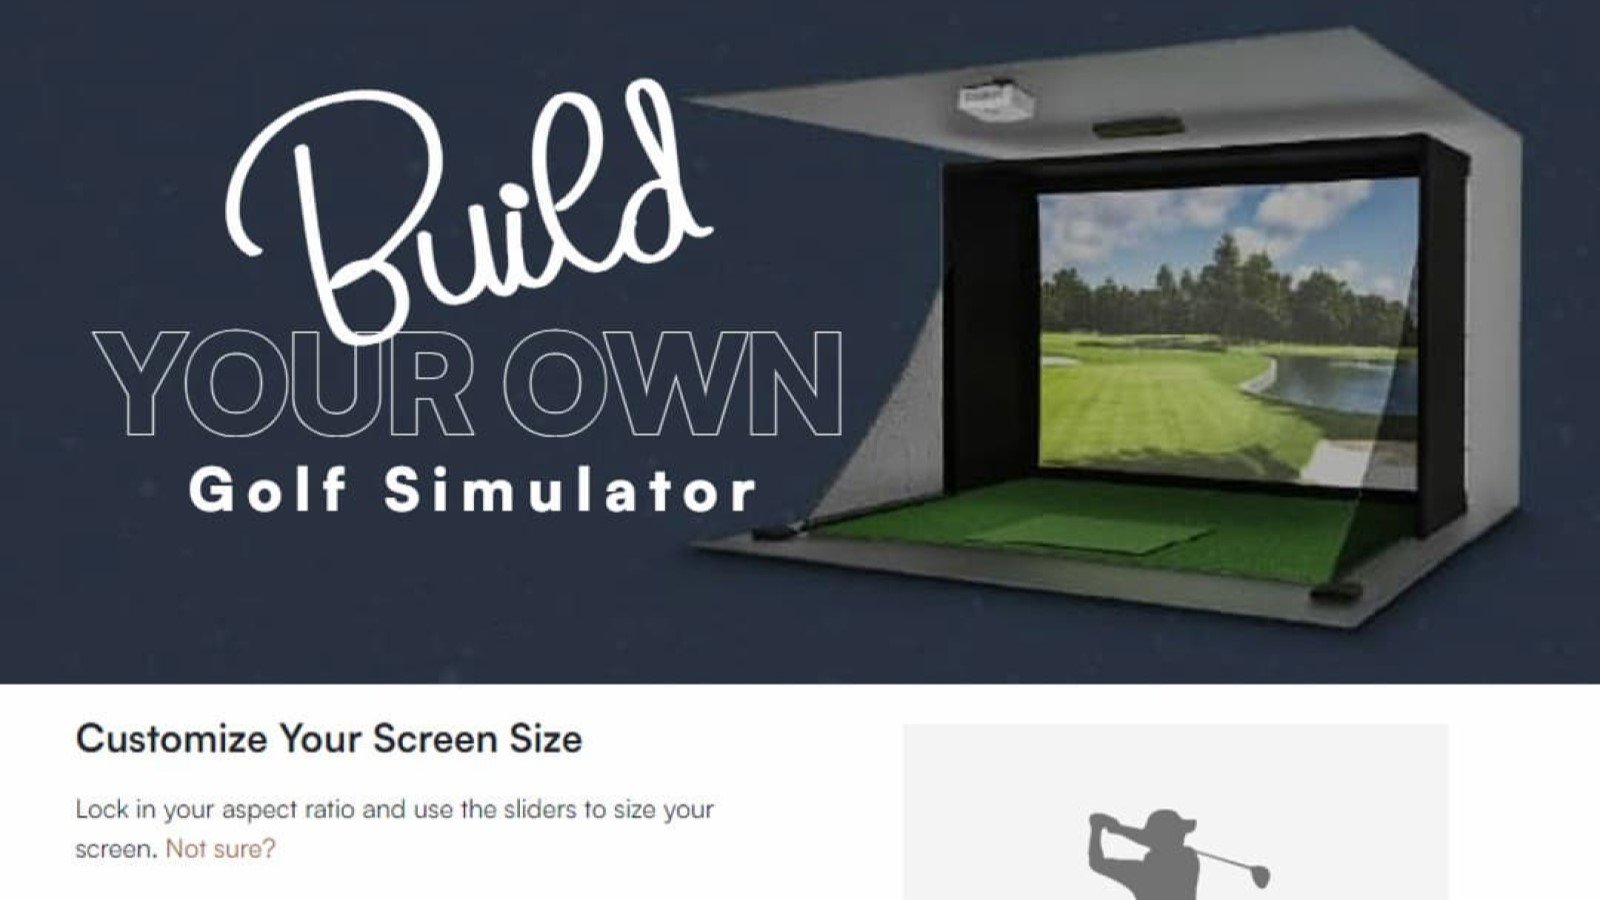 Build your own golf simulator